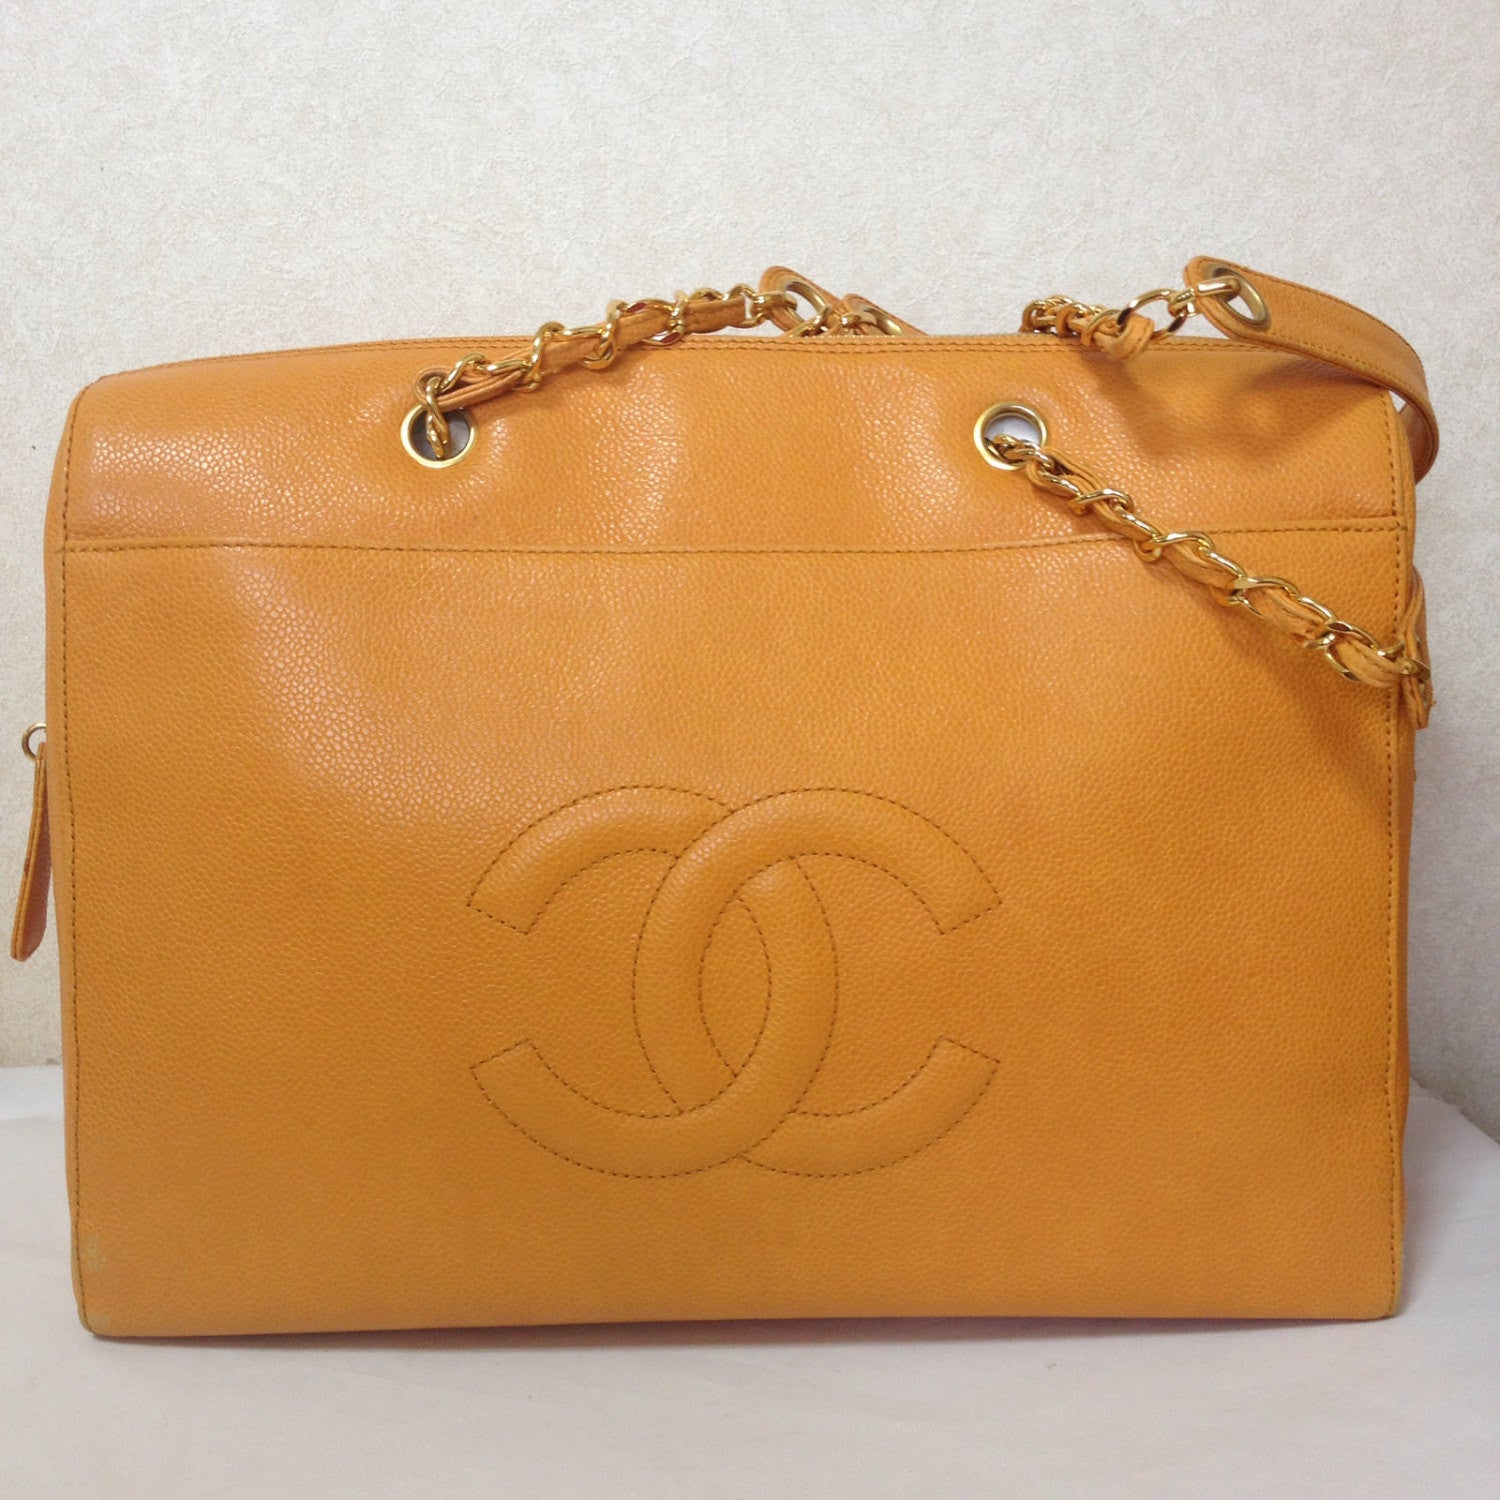 Vintage Chanel yellow caviar leather chain shoulder bag with